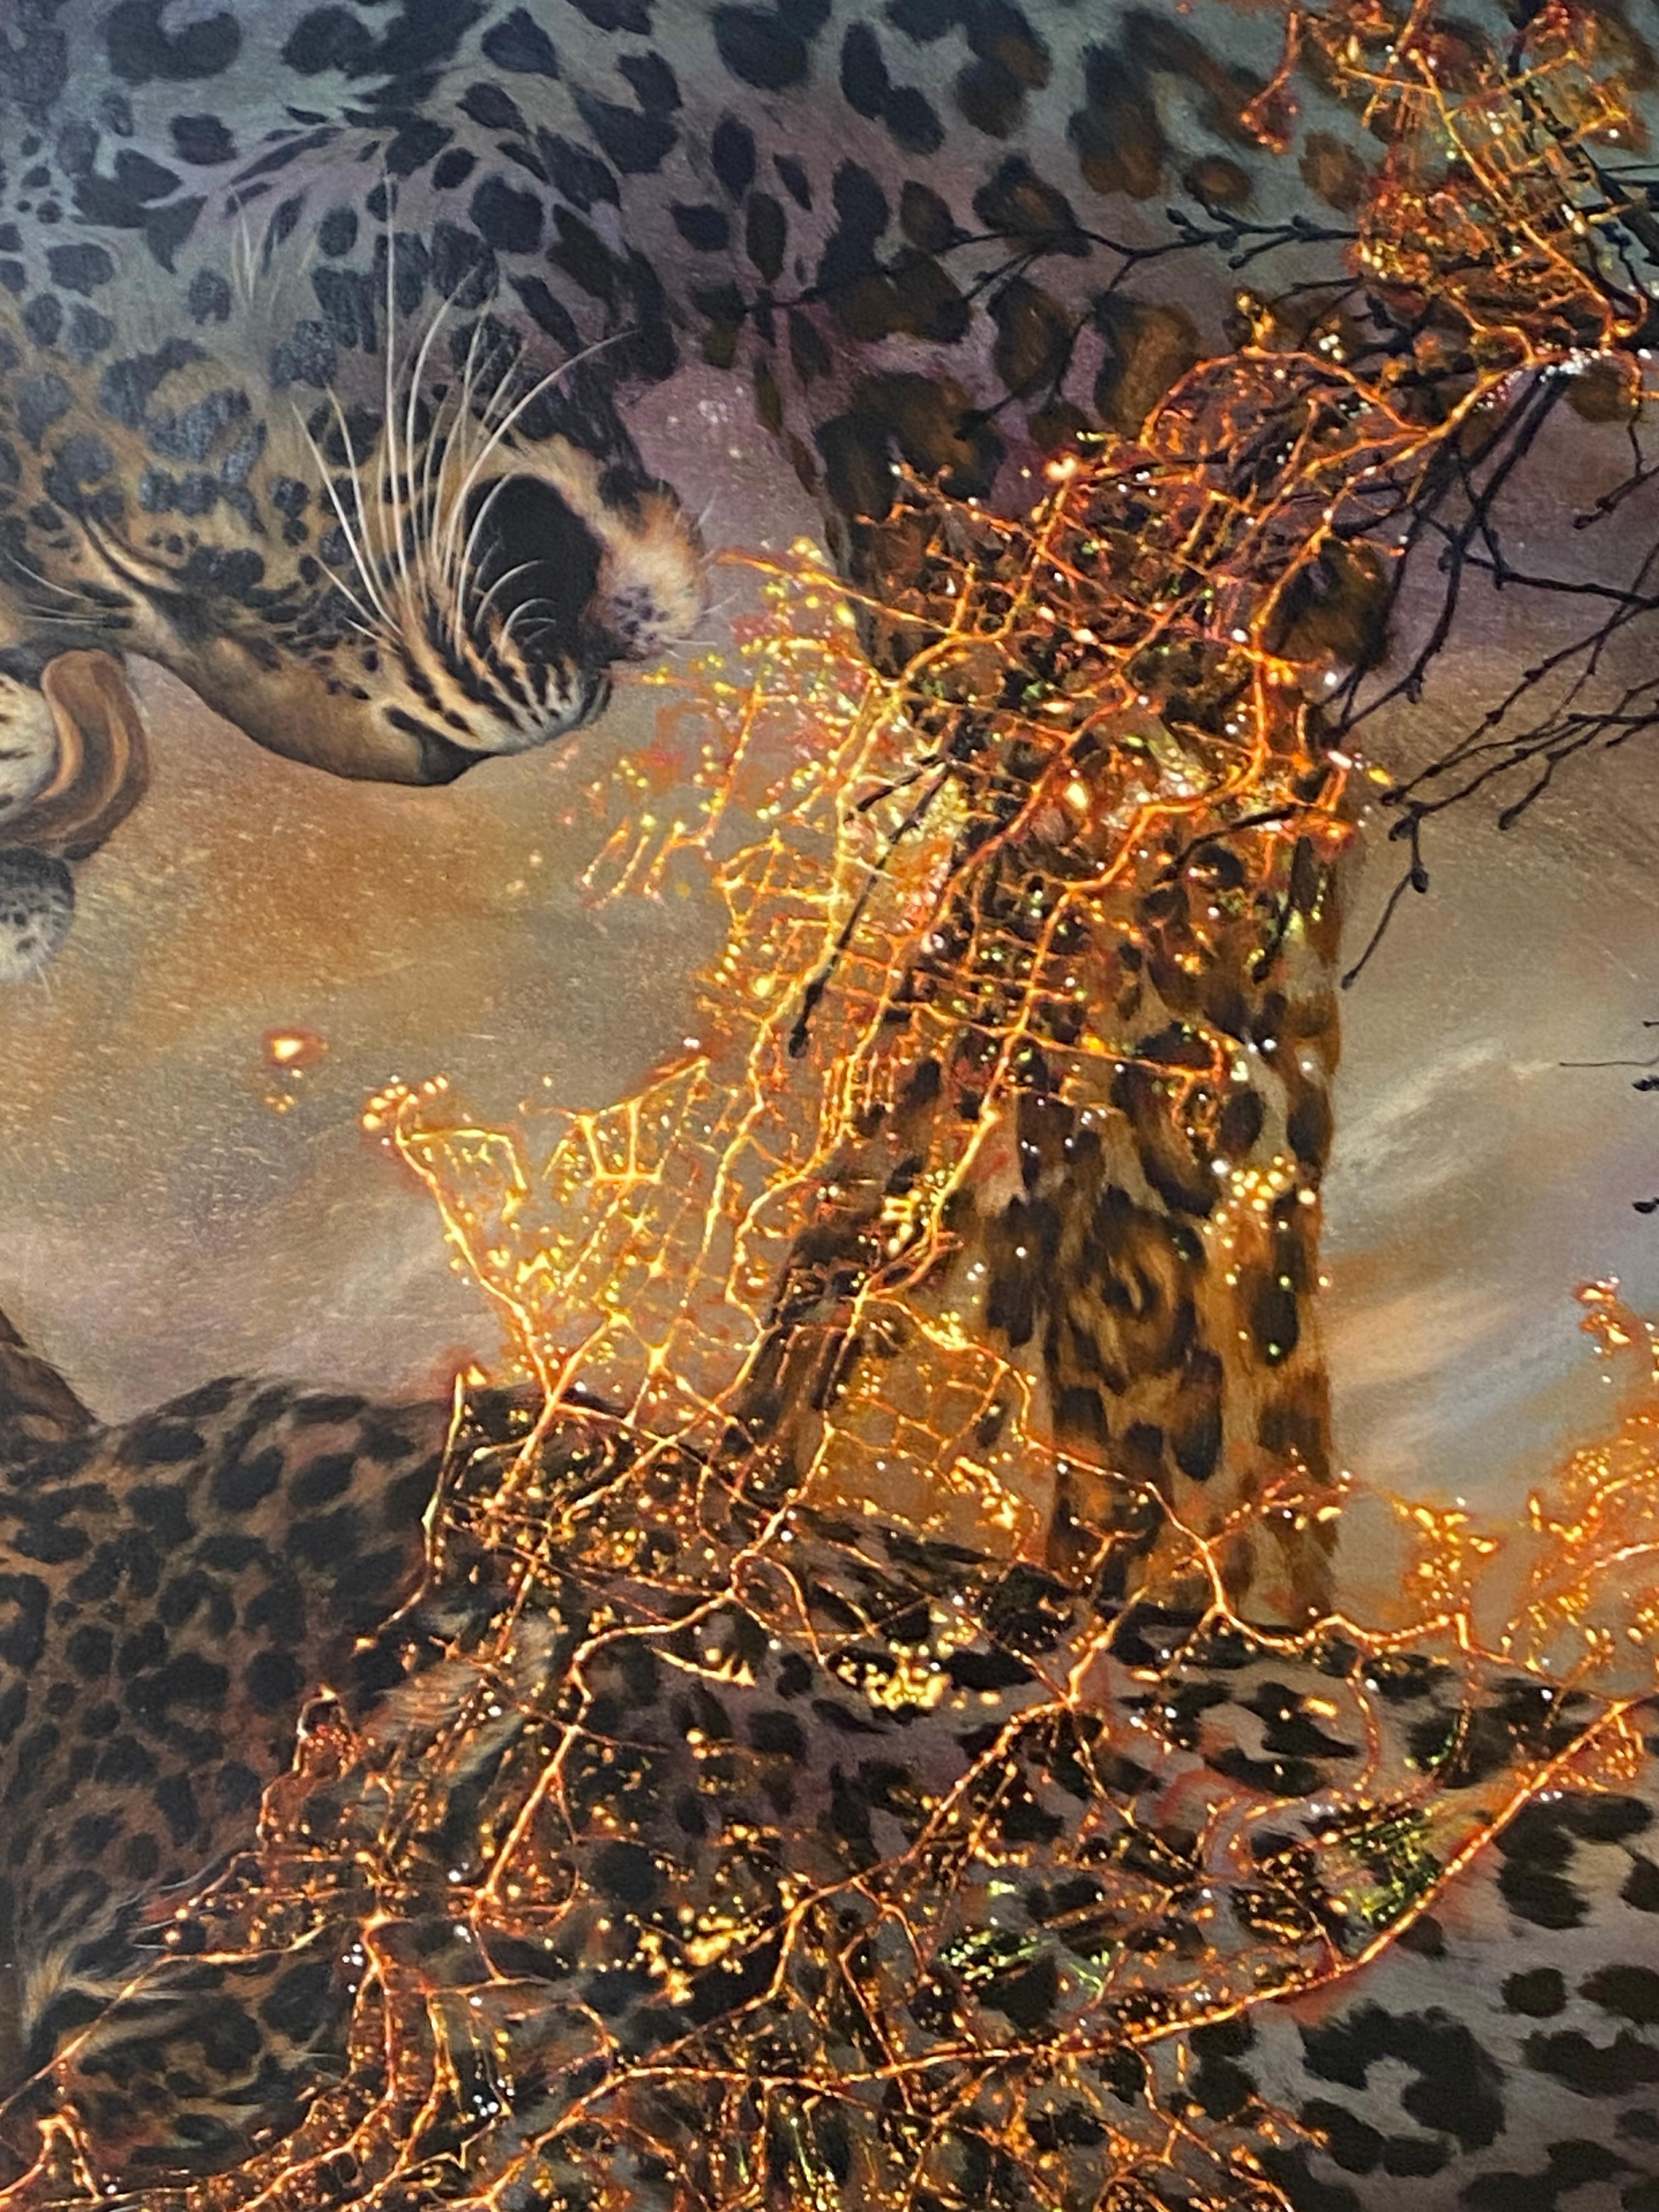 Leopards of Mumbai, Leopard, Animal, Trees, Gray, Gold Nature Inspired Painting For Sale 16